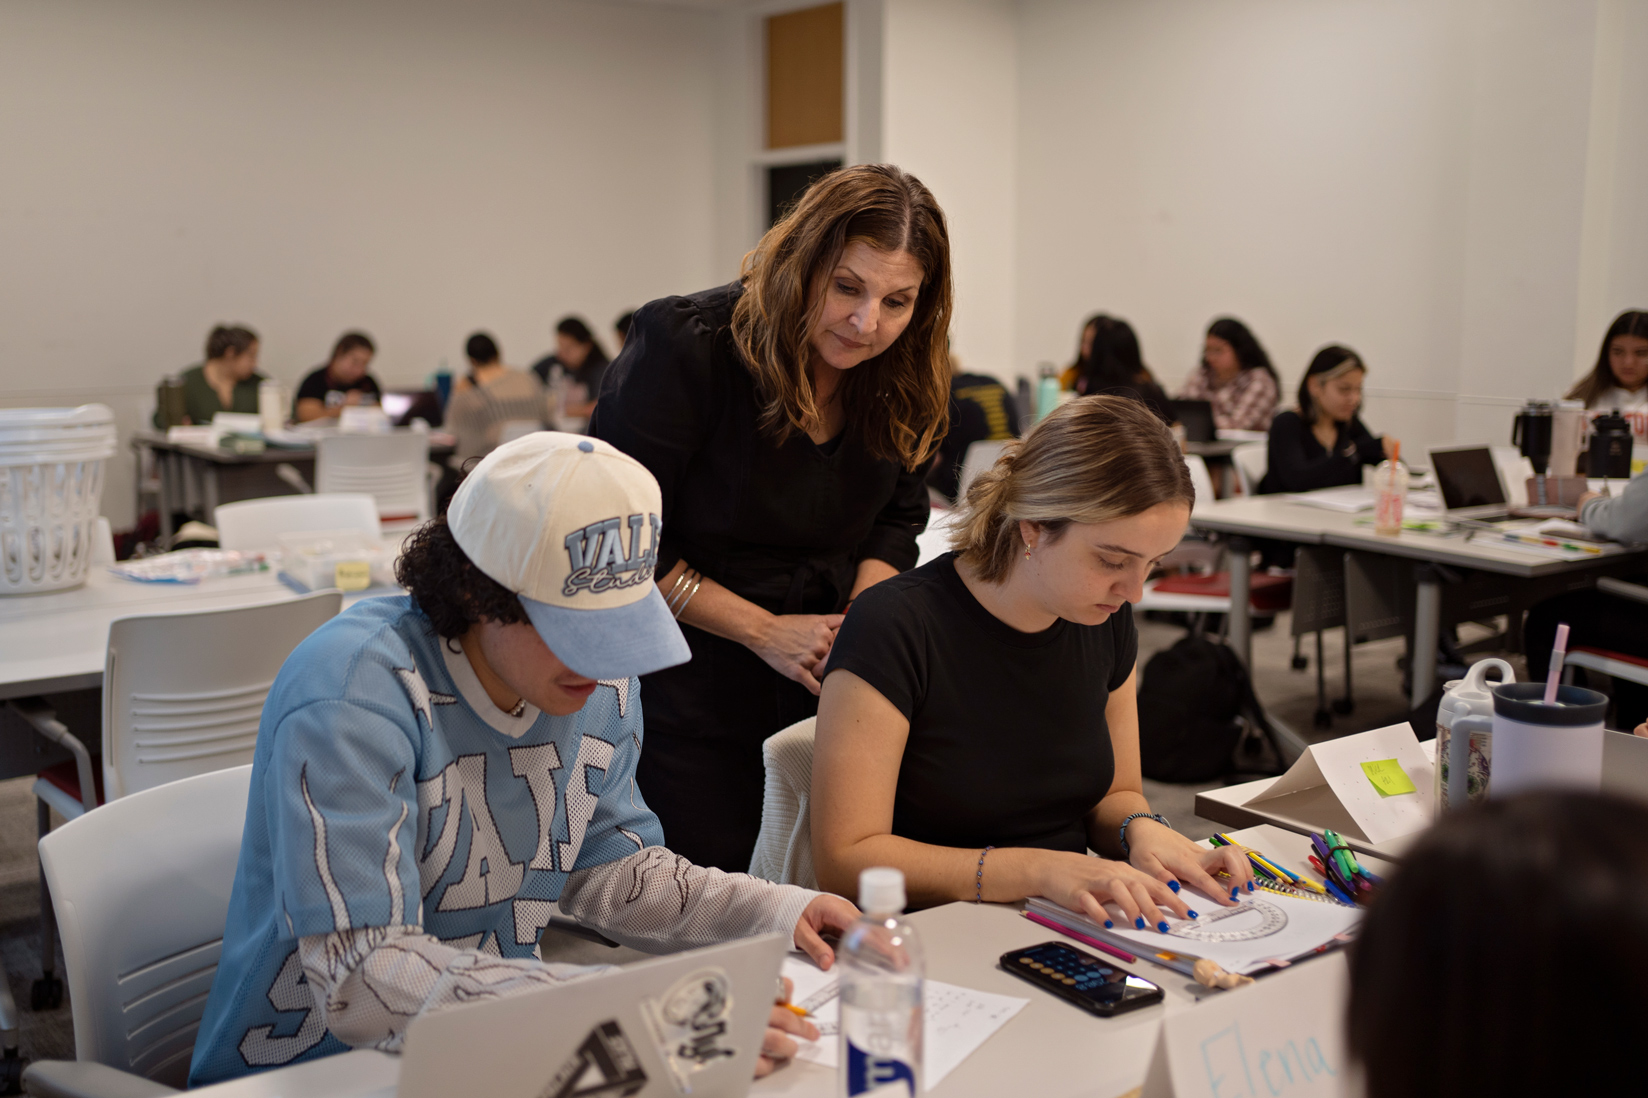 Carrie Cutler, a clinical associate professor of mathematics education, works with students during a teacher-certification class with seniors at the University of Houston.